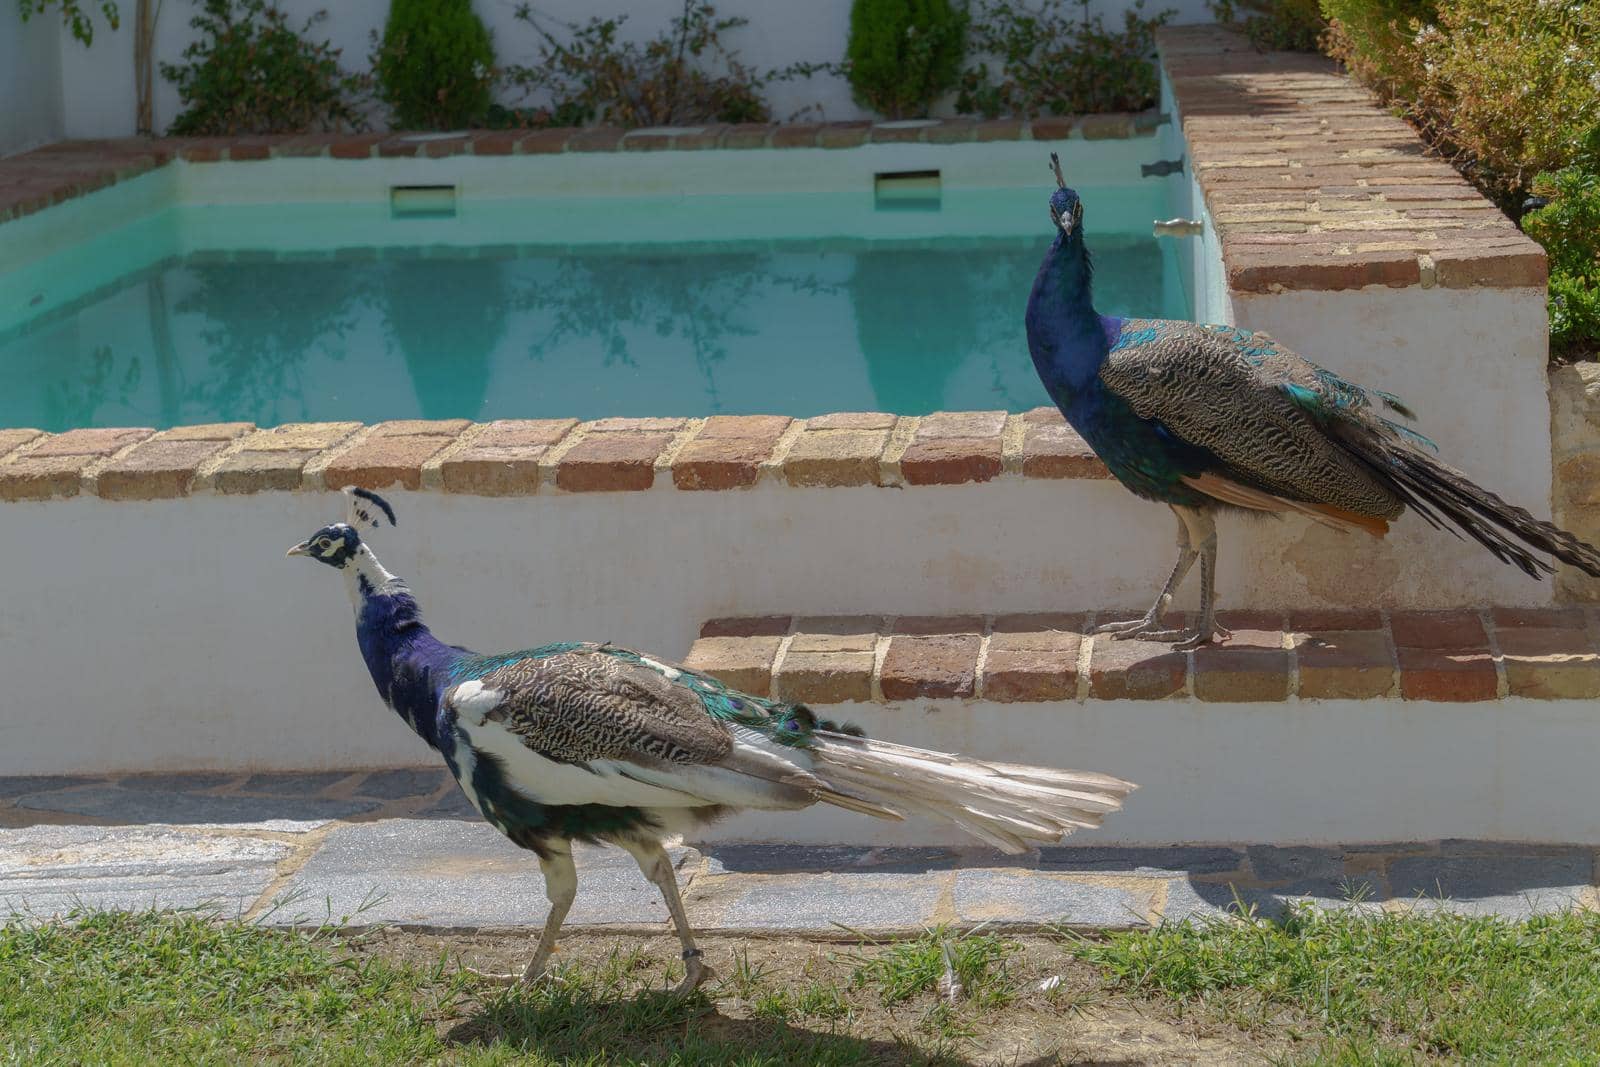 male peacocks strolling in the garden with the pool in the background